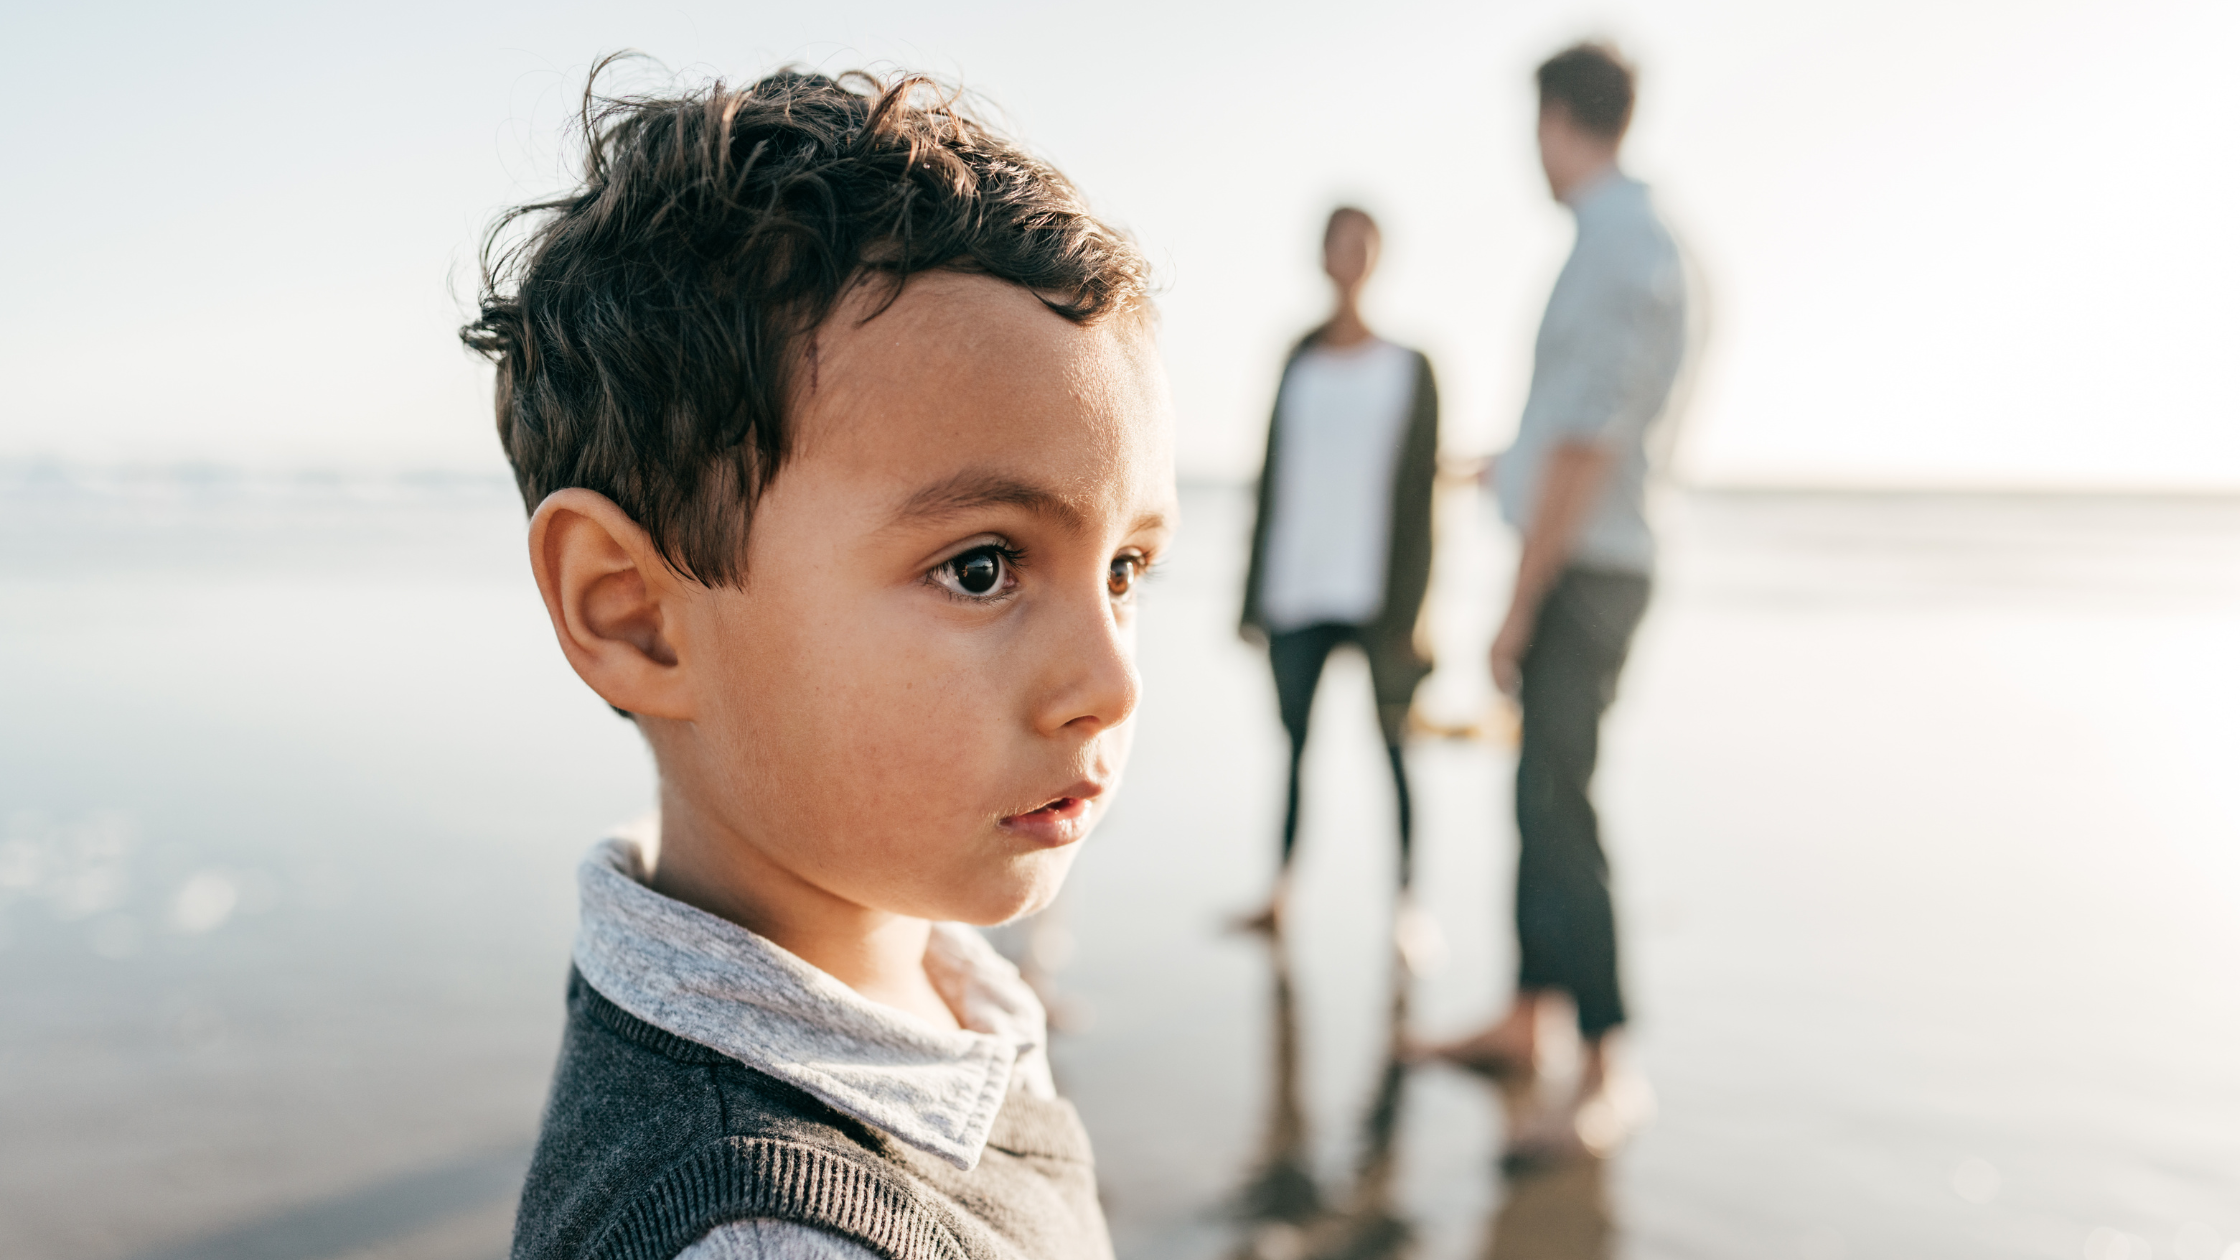 Supporting Your Child’s Mental Health While Going Through a Divorce